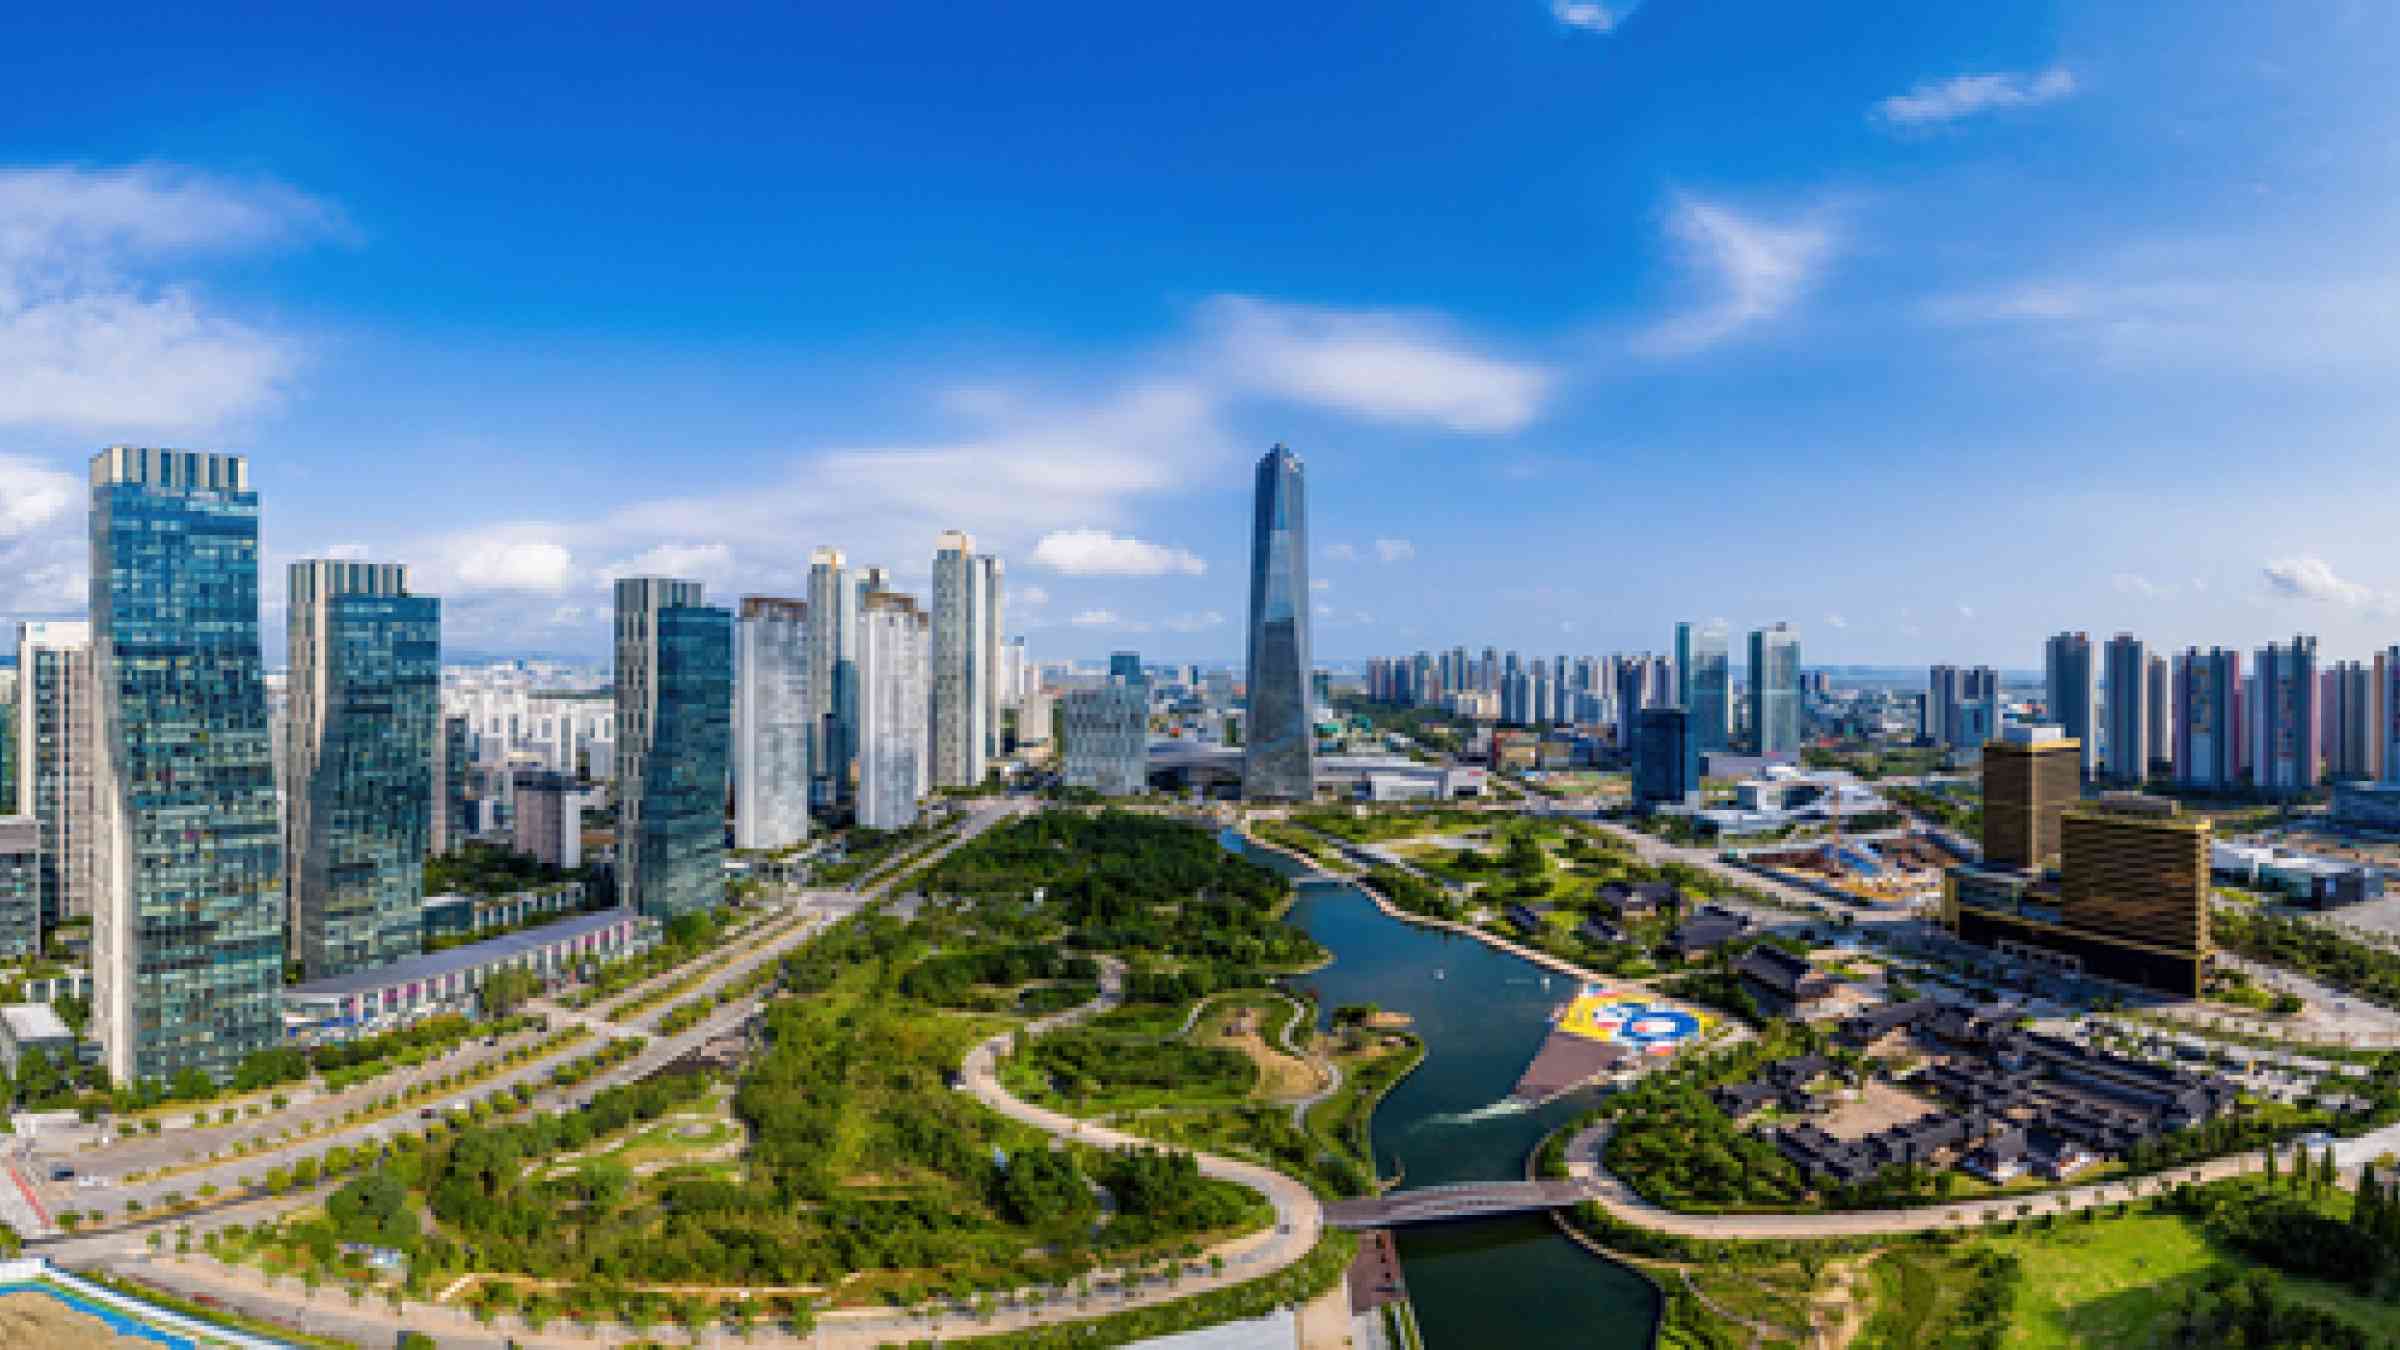 image of Songdo, Yeonsu-gu, Incheon, South Korea - September 3, 2020: Aerial and panoramic view of high rise apartments, Central Park and Northeast Asia Trade Tower